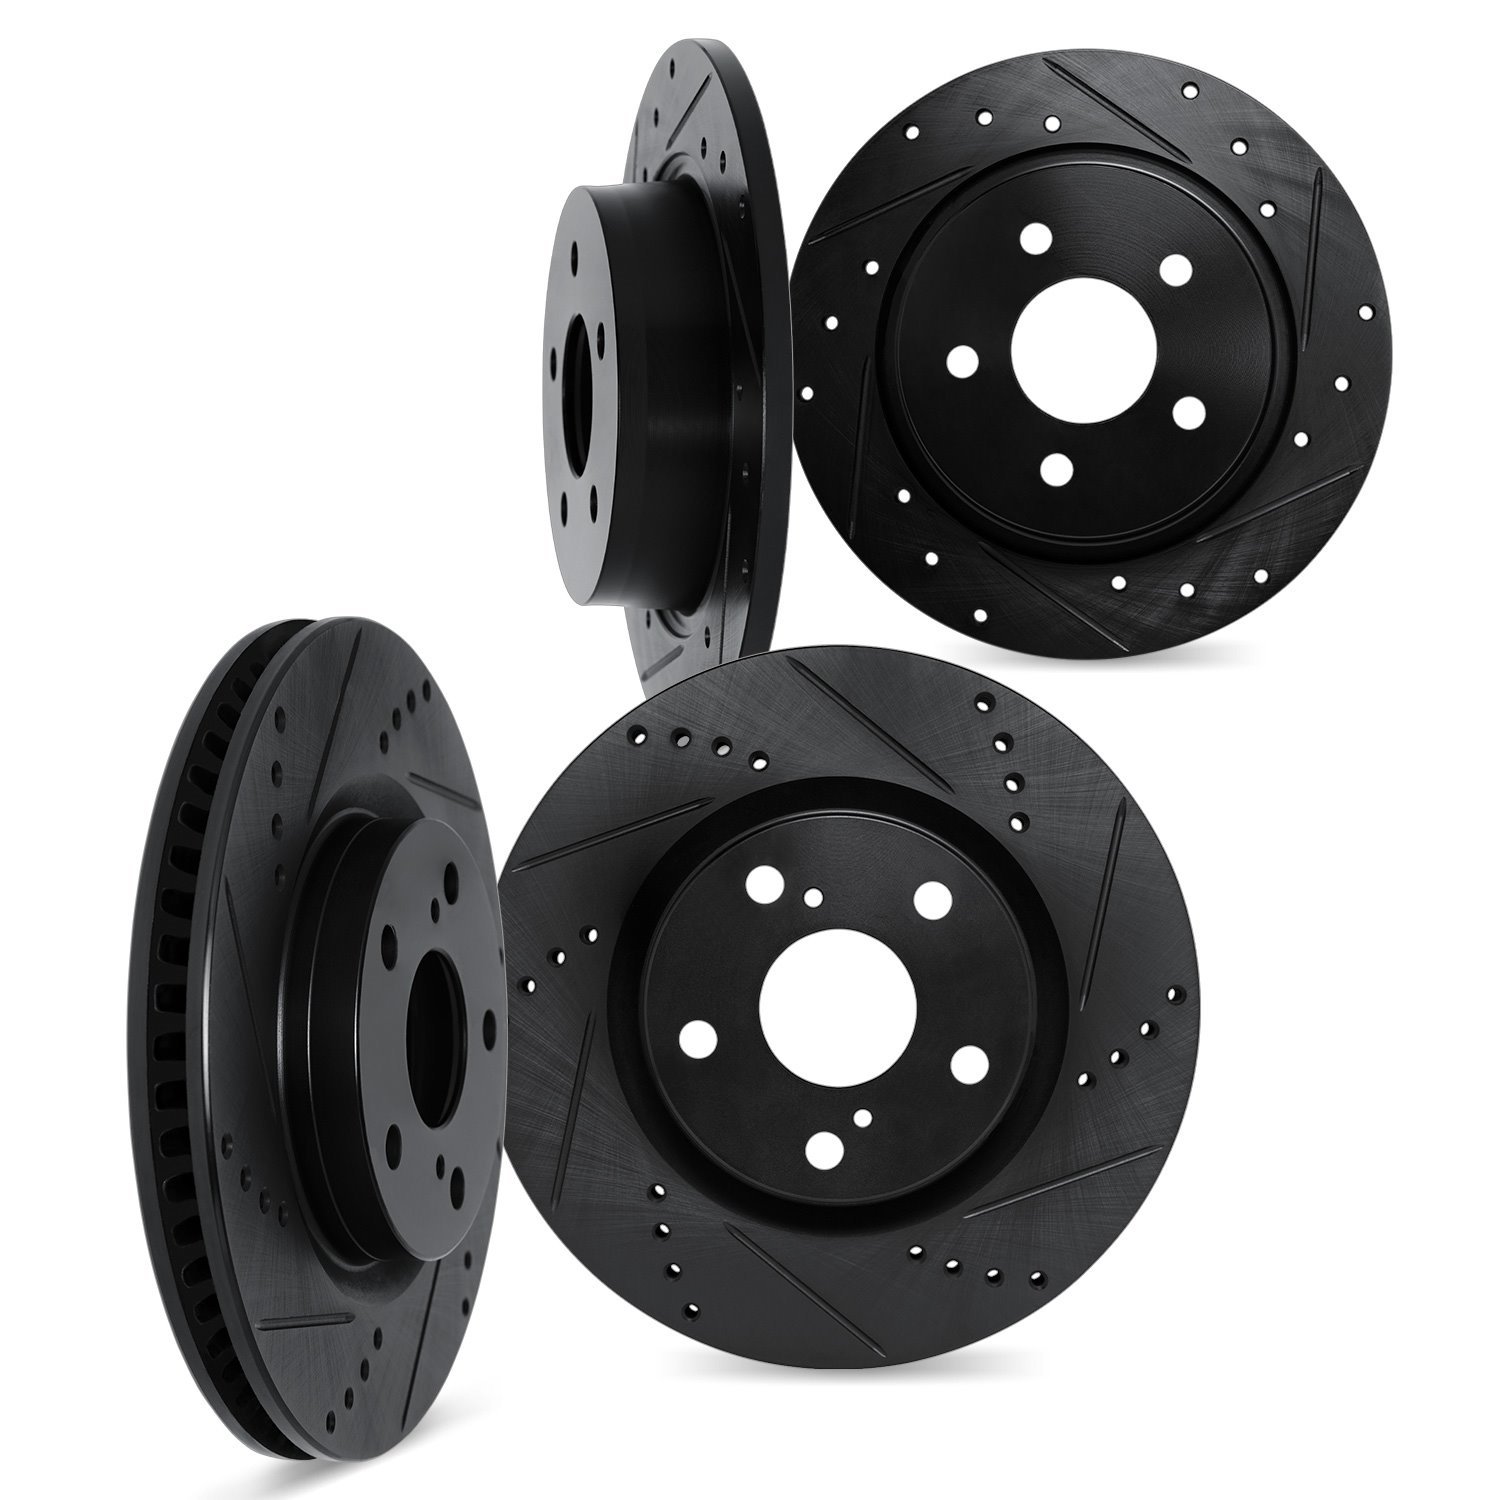 8004-74025 Drilled/Slotted Brake Rotors [Black], 1998-2015 Audi/Volkswagen, Position: Front and Rear